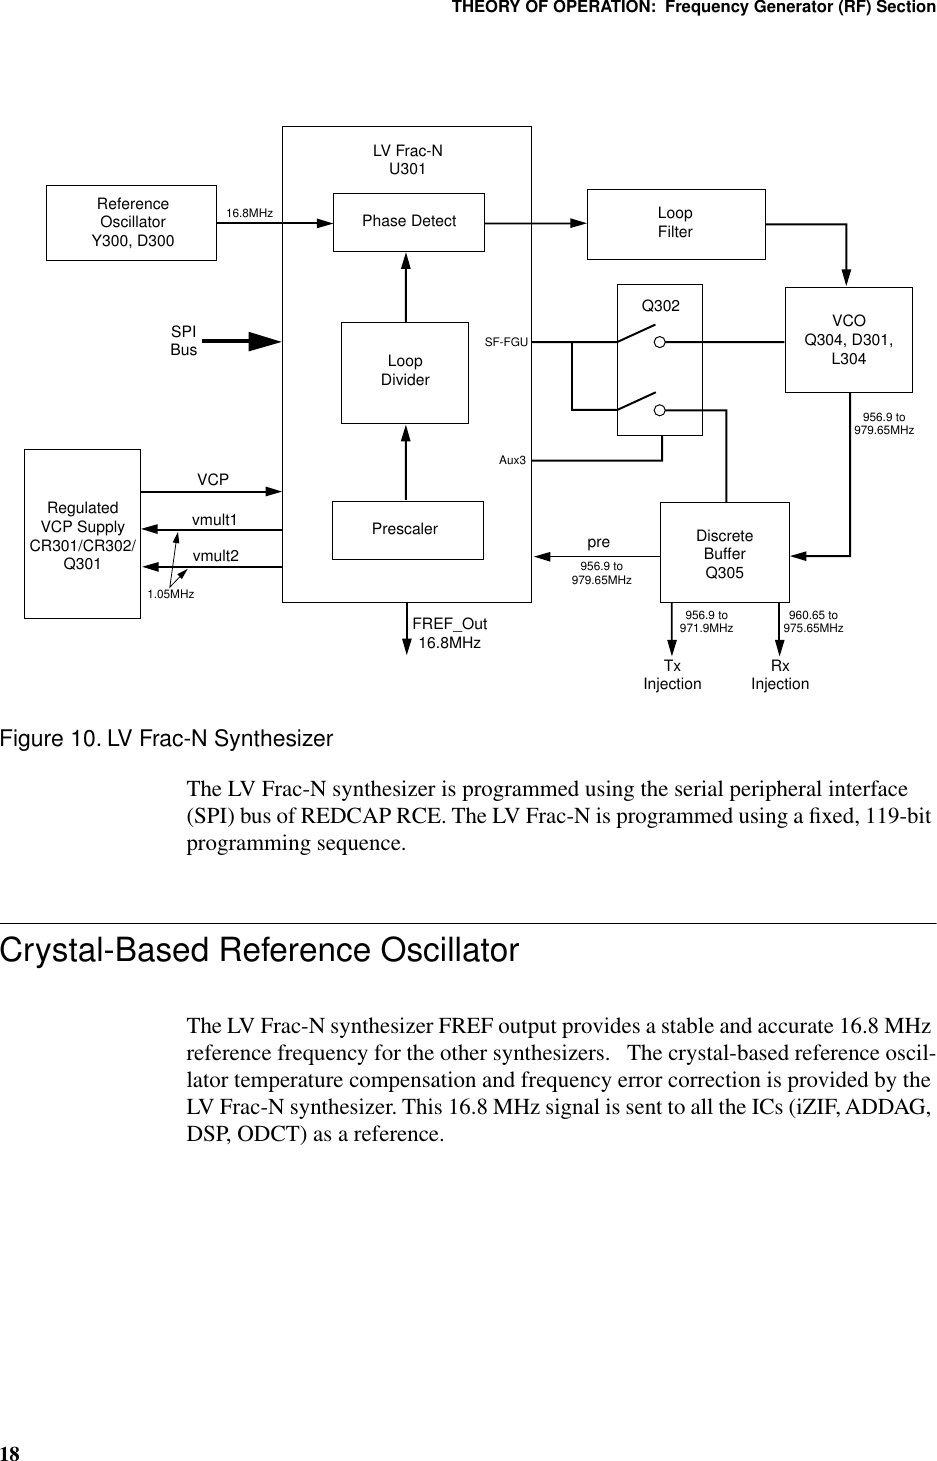 THEORY OF OPERATION:  Frequency Generator (RF) Section18Figure 10. LV Frac-N SynthesizerThe LV Frac-N synthesizer is programmed using the serial peripheral interface (SPI) bus of REDCAP RCE. The LV Frac-N is programmed using a ﬁxed, 119-bit programming sequence.Crystal-Based Reference OscillatorThe LV Frac-N synthesizer FREF output provides a stable and accurate 16.8 MHz reference frequency for the other synthesizers.   The crystal-based reference oscil-lator temperature compensation and frequency error correction is provided by the LV Frac-N synthesizer. This 16.8 MHz signal is sent to all the ICs (iZIF, ADDAG, DSP, ODCT) as a reference.16.8MHzReferenceOscillatorY300, D300SPIBusVCPvmult1vmult21.05MHzRegulatedVCP SupplyCR301/CR302/Q301LV Frac-NU301Phase DetectLoopDividerPrescalerFREF_Out16.8MHzSF-FGUAux3pre956.9 to979.65MHzTxInjectionLoopFilterQ302 VCOQ304, D301,L304956.9 to979.65MHz960.65 to975.65MHz956.9 to971.9MHzDiscreteBufferQ305RxInjection